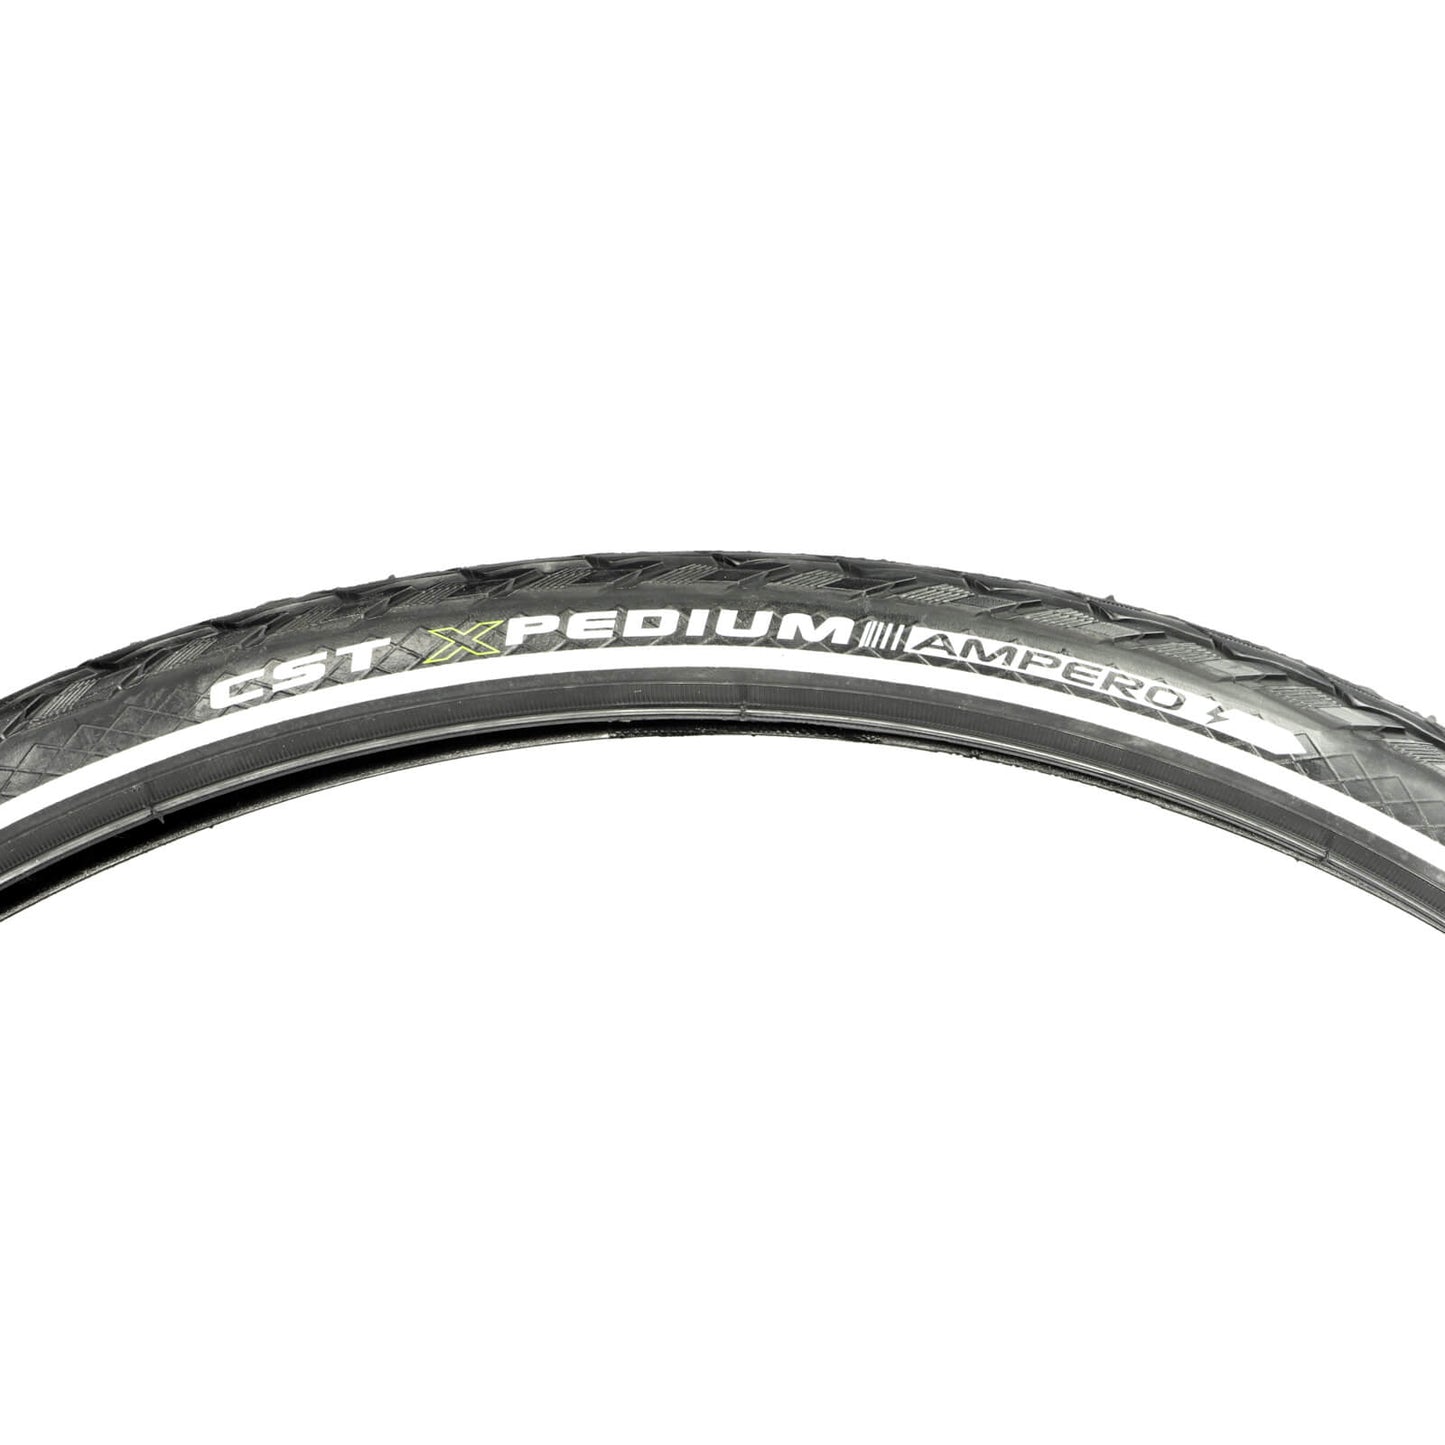 CST Xpedium Level 3 Single Compound Wire EPS 26x1.75" 26 Inch Clincher Bike Tyre